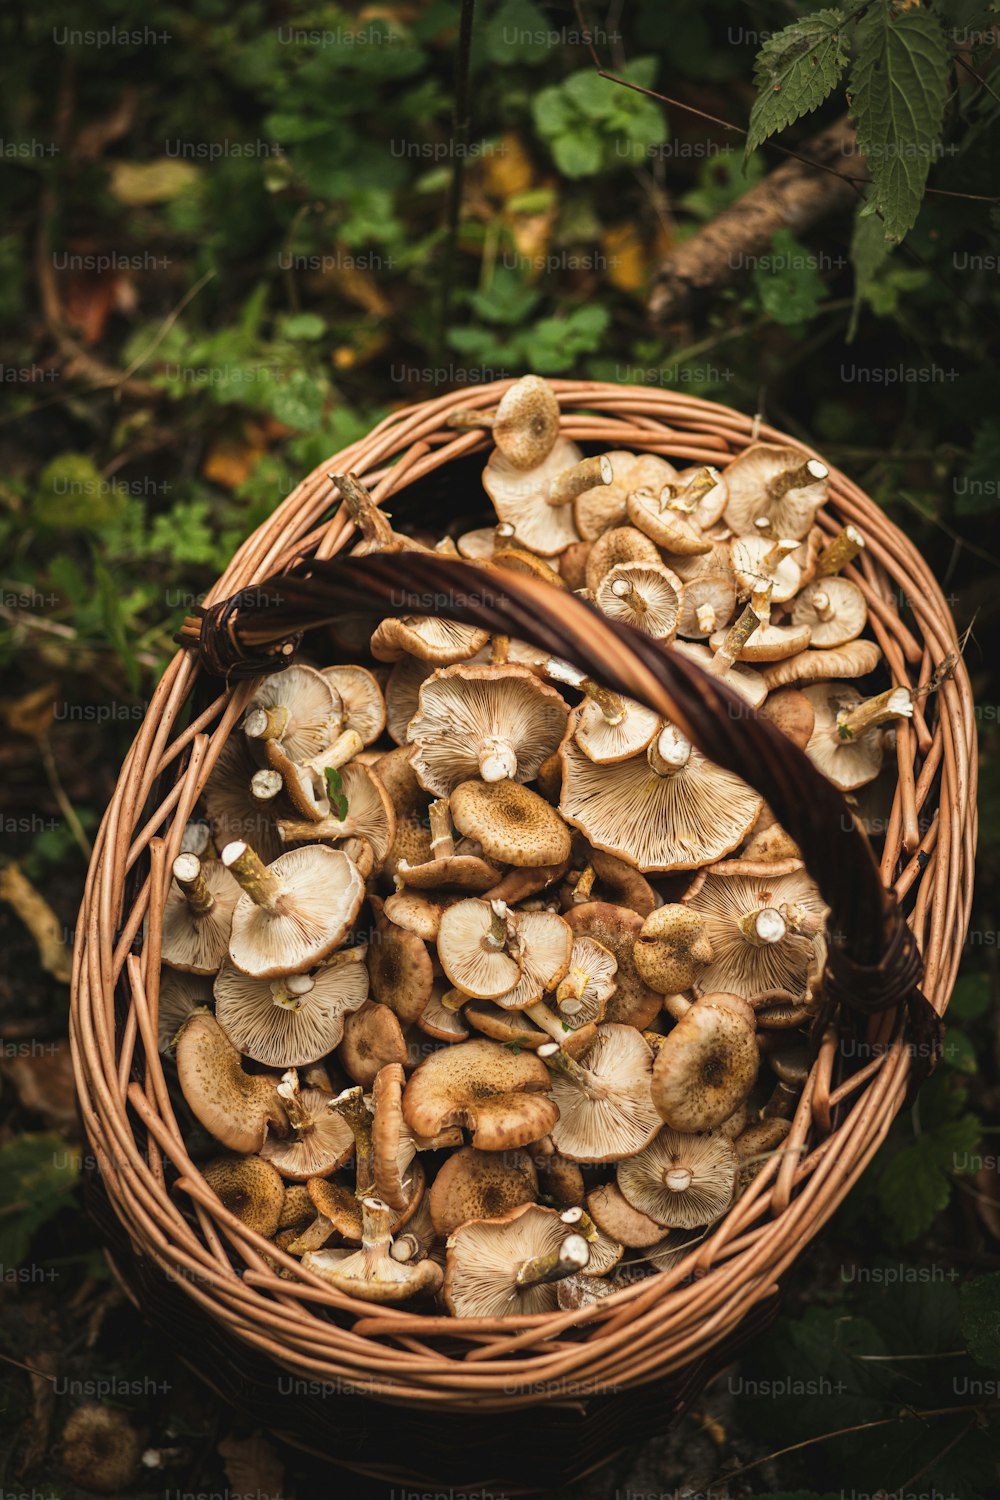 a basket full of mushrooms sitting on the ground